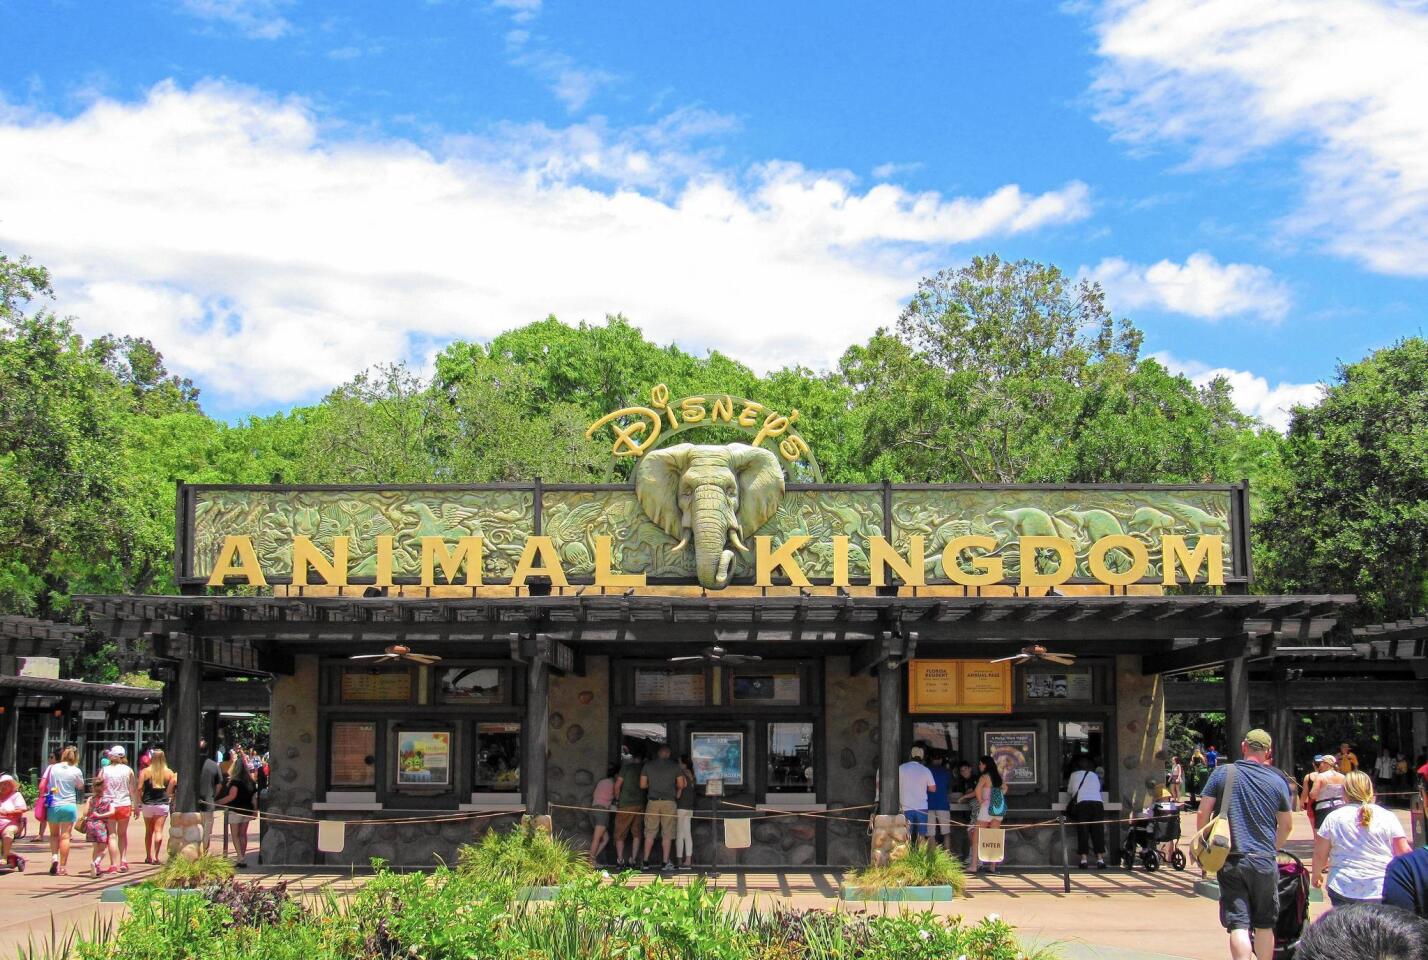 The extensive foliage at the entrance to Animal Kingdom hides the park’s iconic Tree of Life.